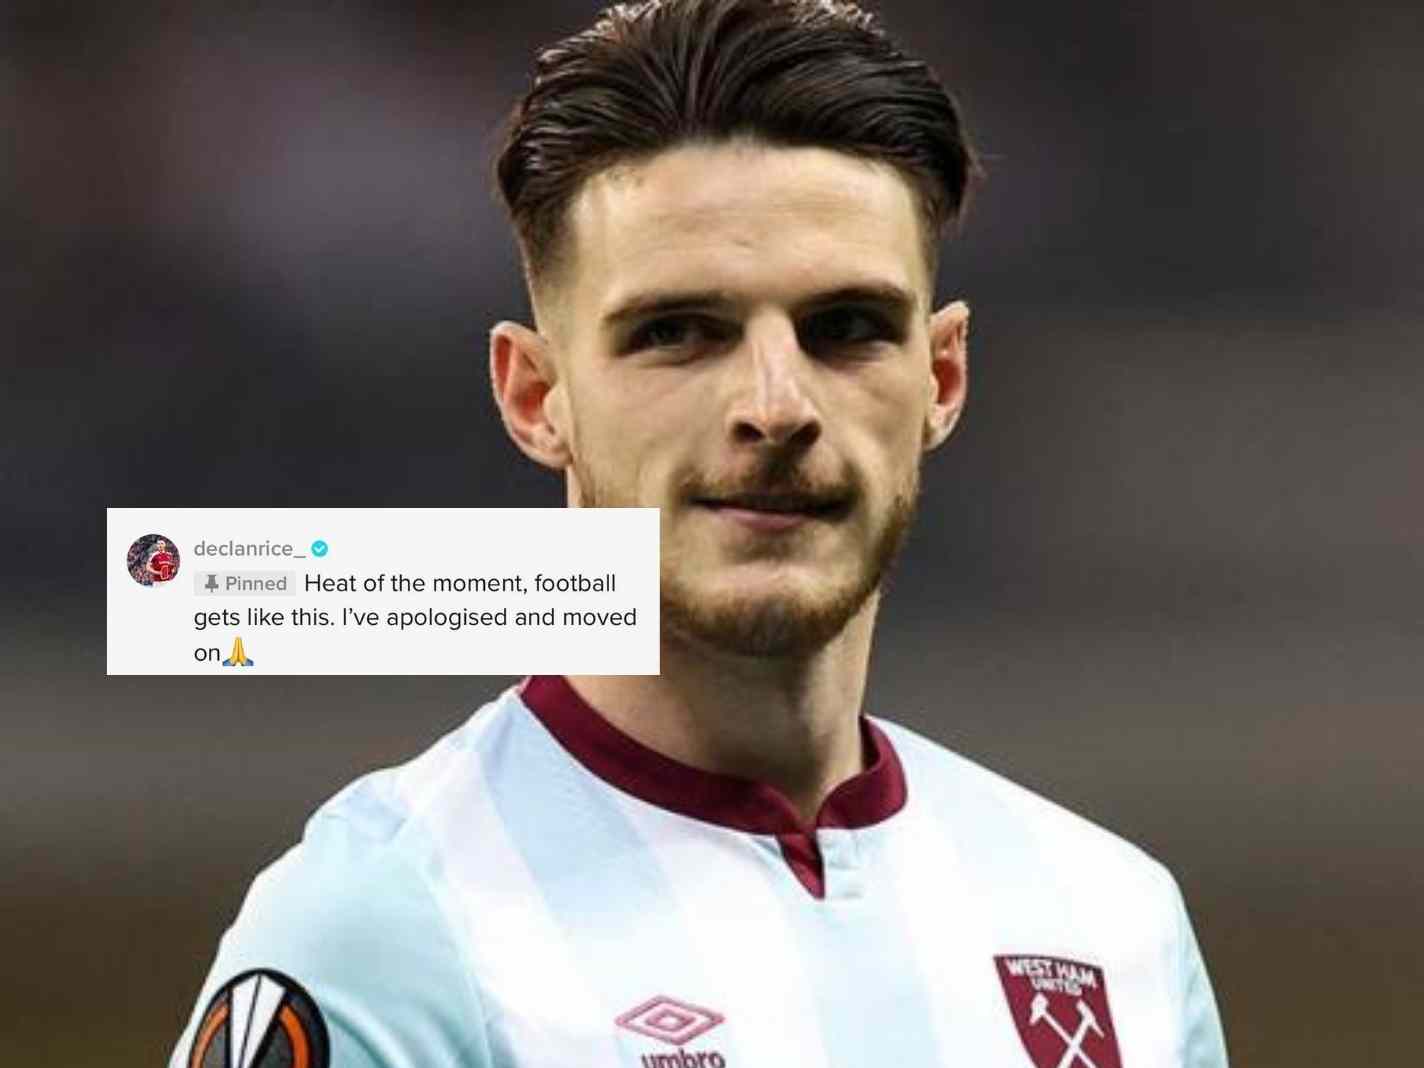 The photo shows Declan Rice looking on before a West Ham match, along with a screenshot of Rice's TikTok apology to referee.